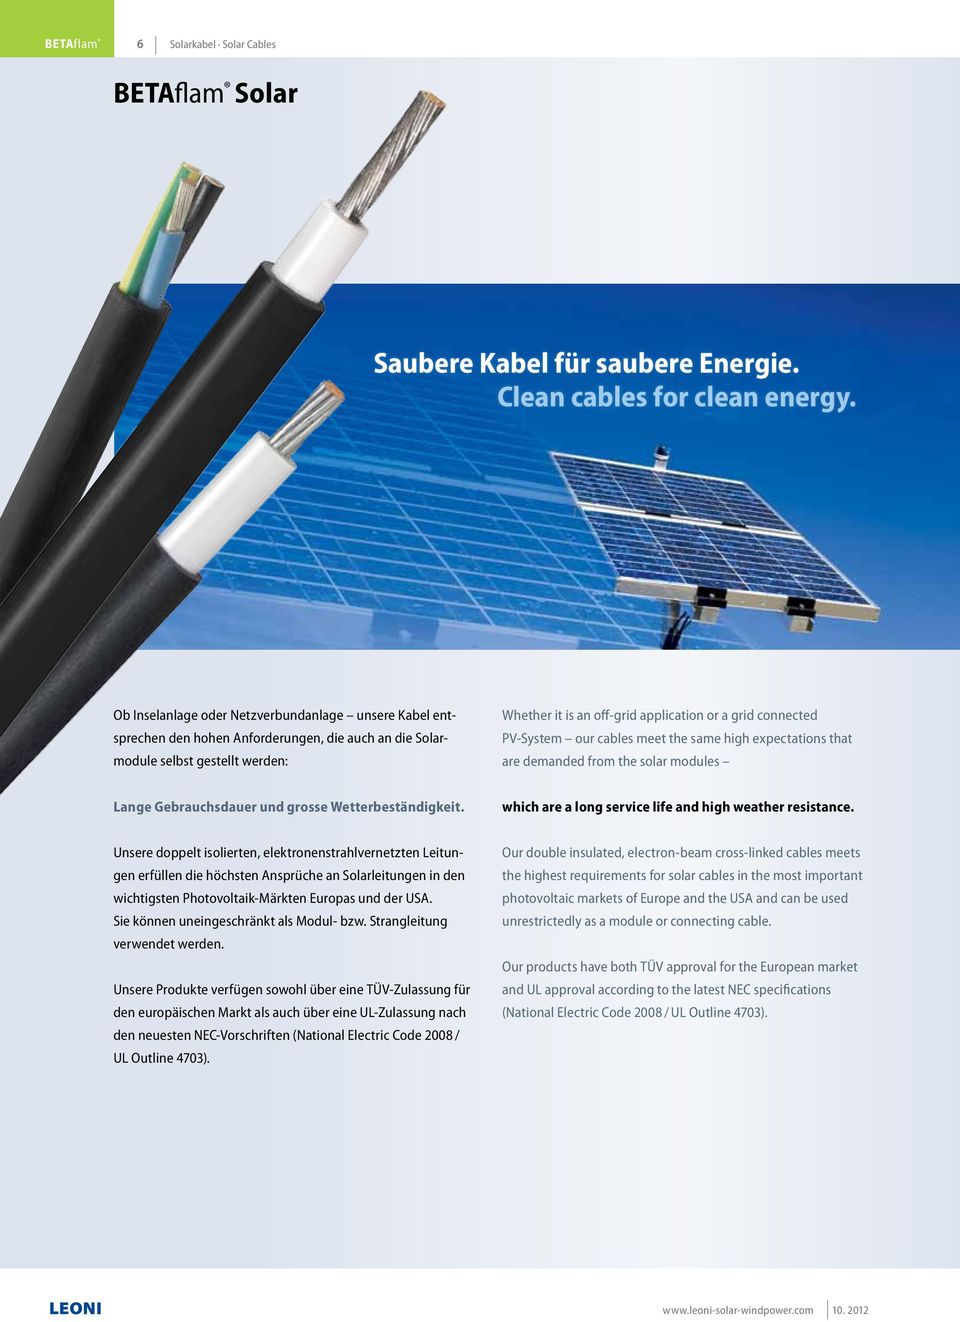 PV-System our cables meet the same high expectations that are demanded from the solar modules Lange Gebrauchsdauer und grosse Wetterbeständigkeit.